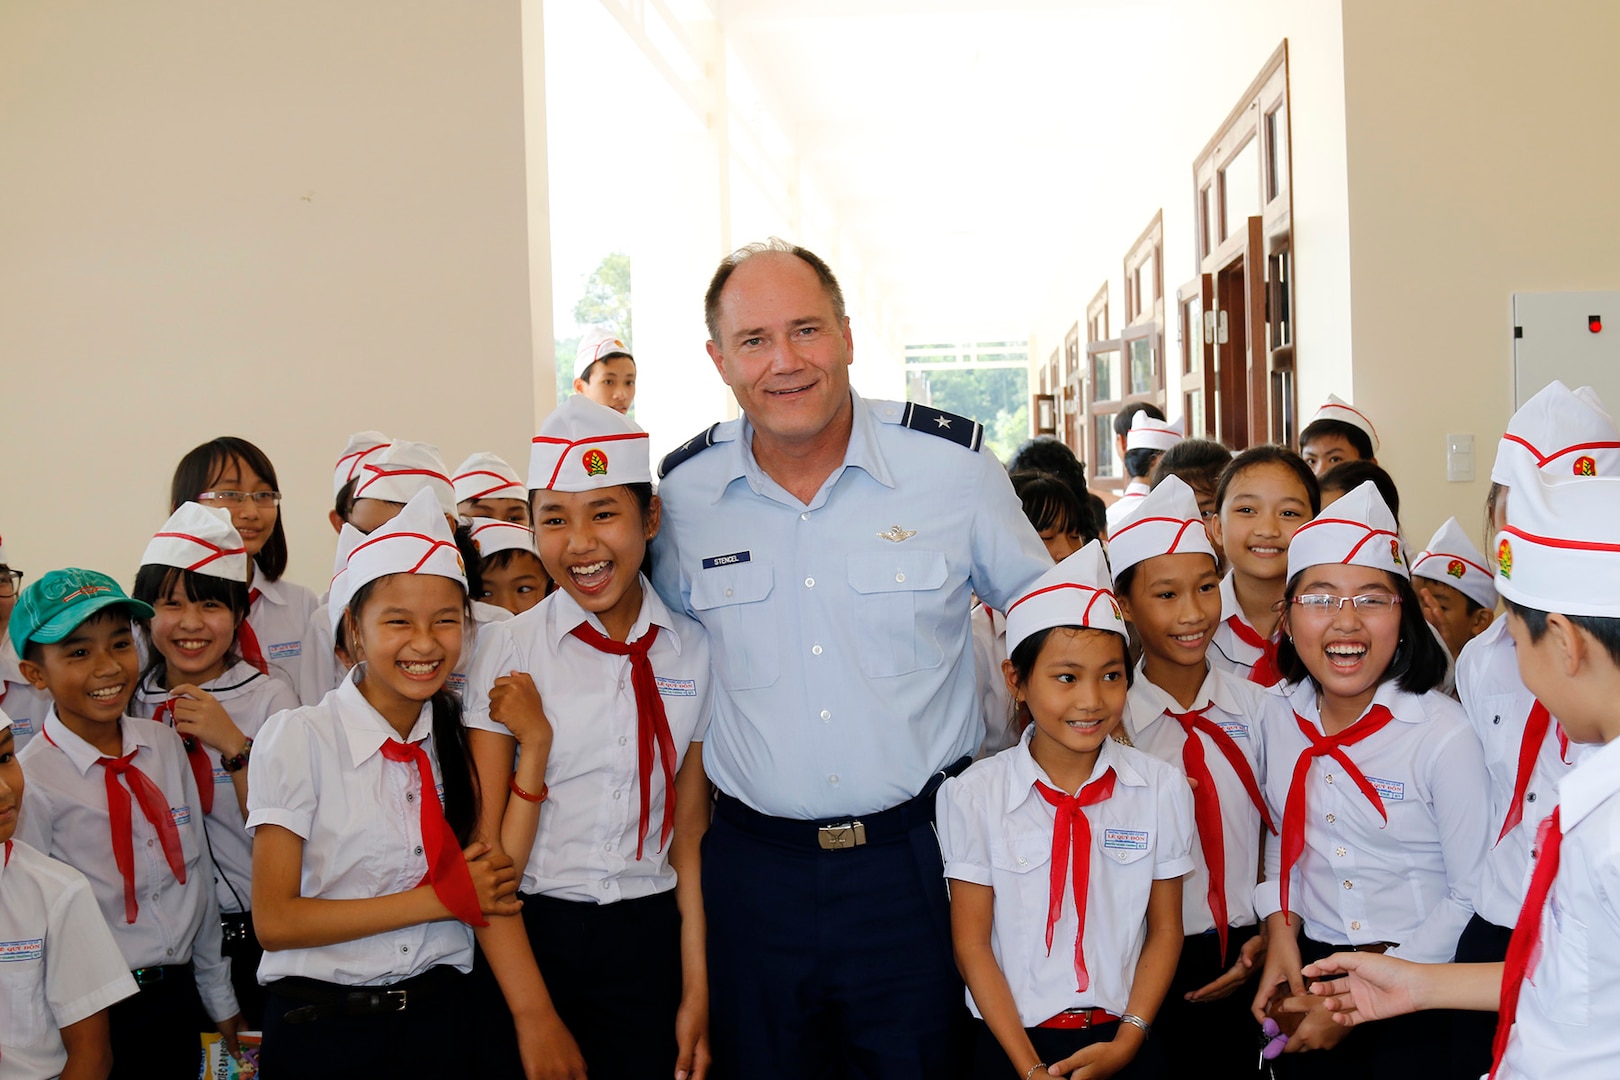 Brig. Gen. Michael E. Stencel, Adjutant General, Oregon, poses for a photo with students at their new intermediate school in Phu Tinh Village in the Quang Nam Province of Vietnam, Oct. 21, following a ribbon cutting ceremony. The new school was built in cooperation between the U.S. and Vietnam and has a secondary-use as a shelter during natural disasters.